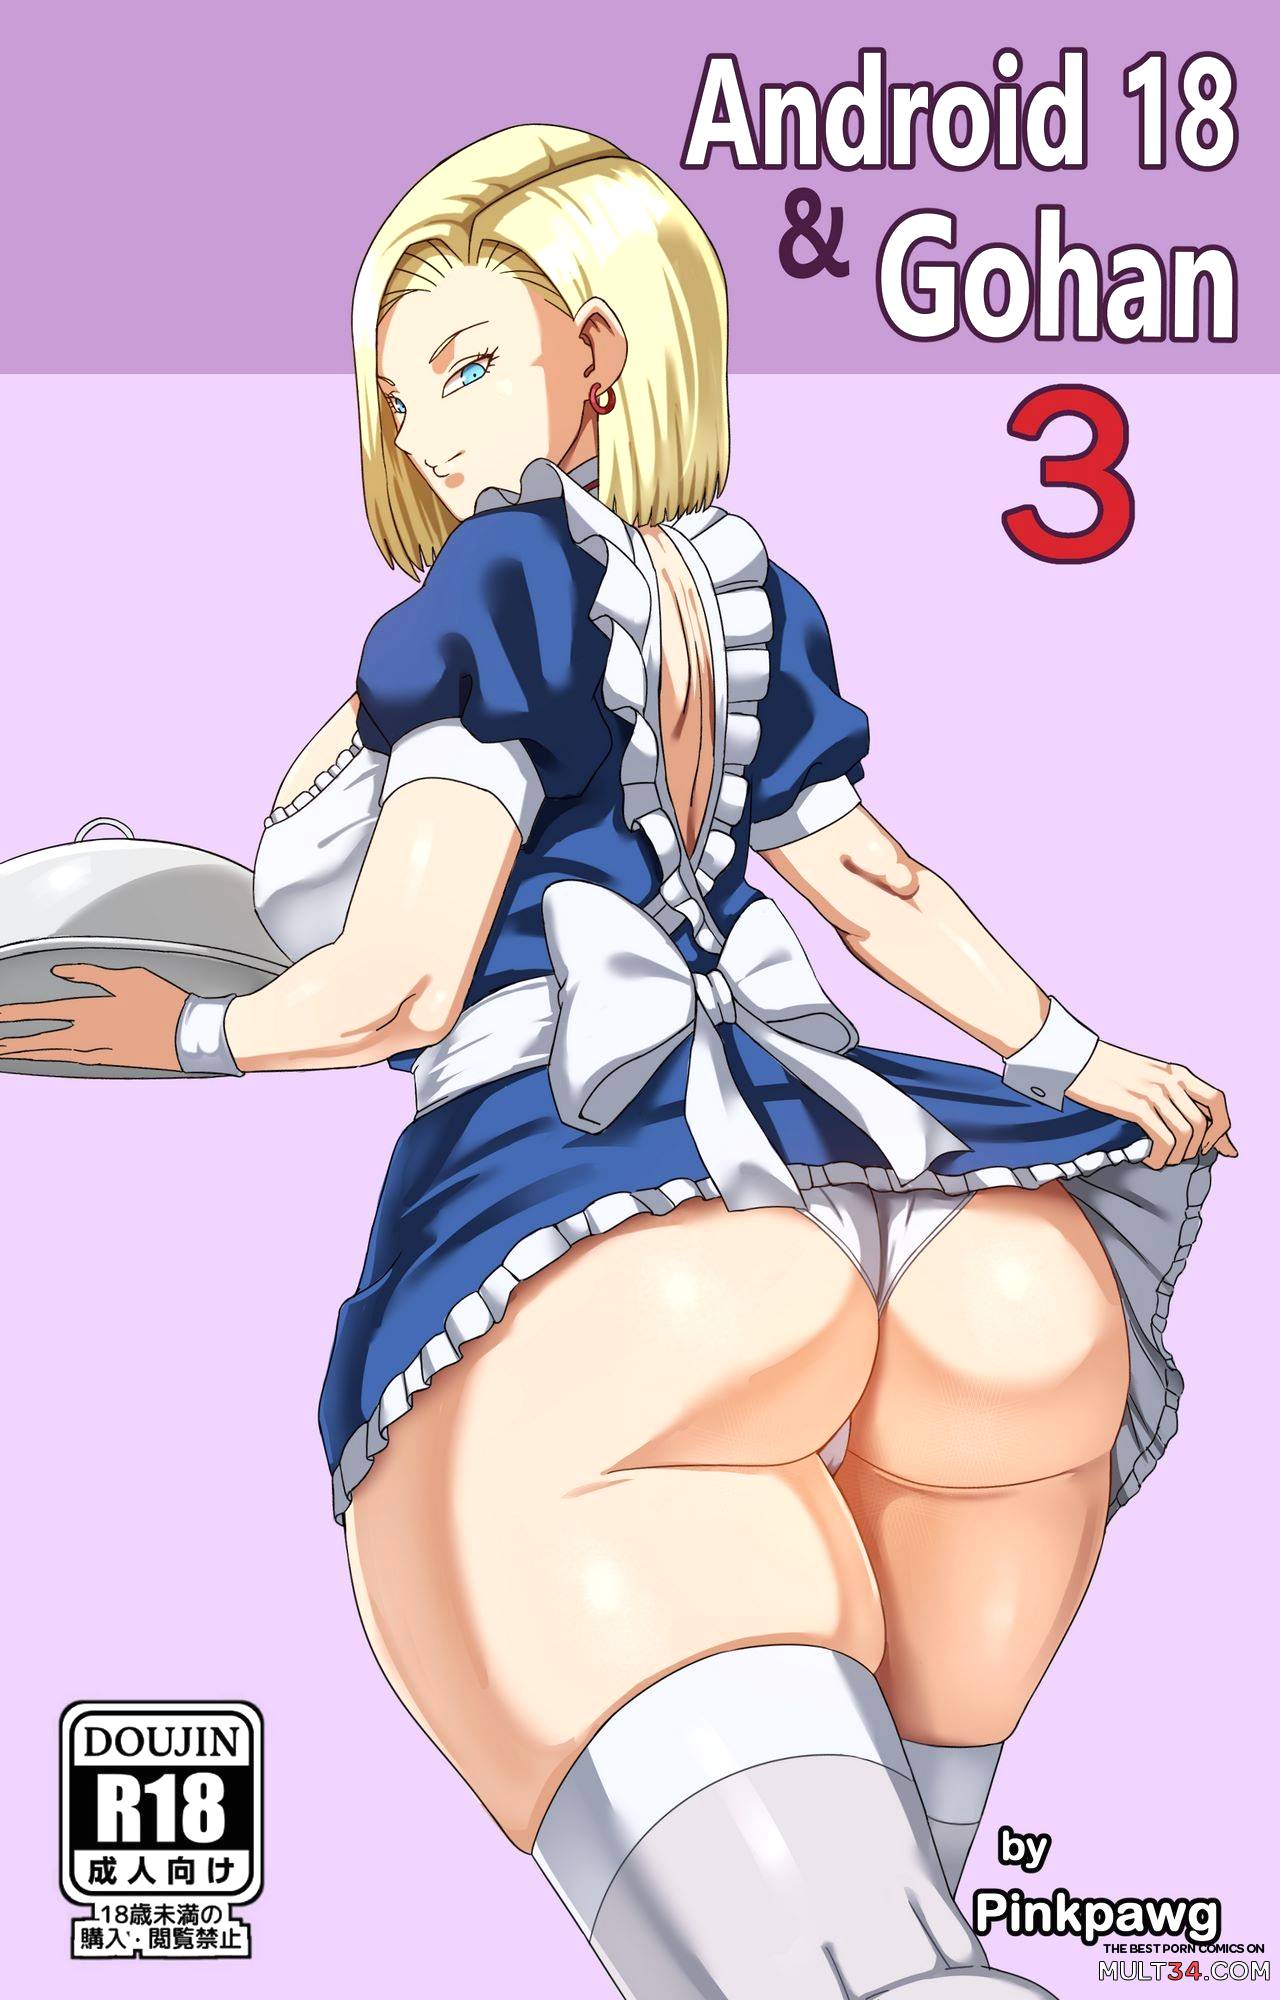 Android 18 nude comic